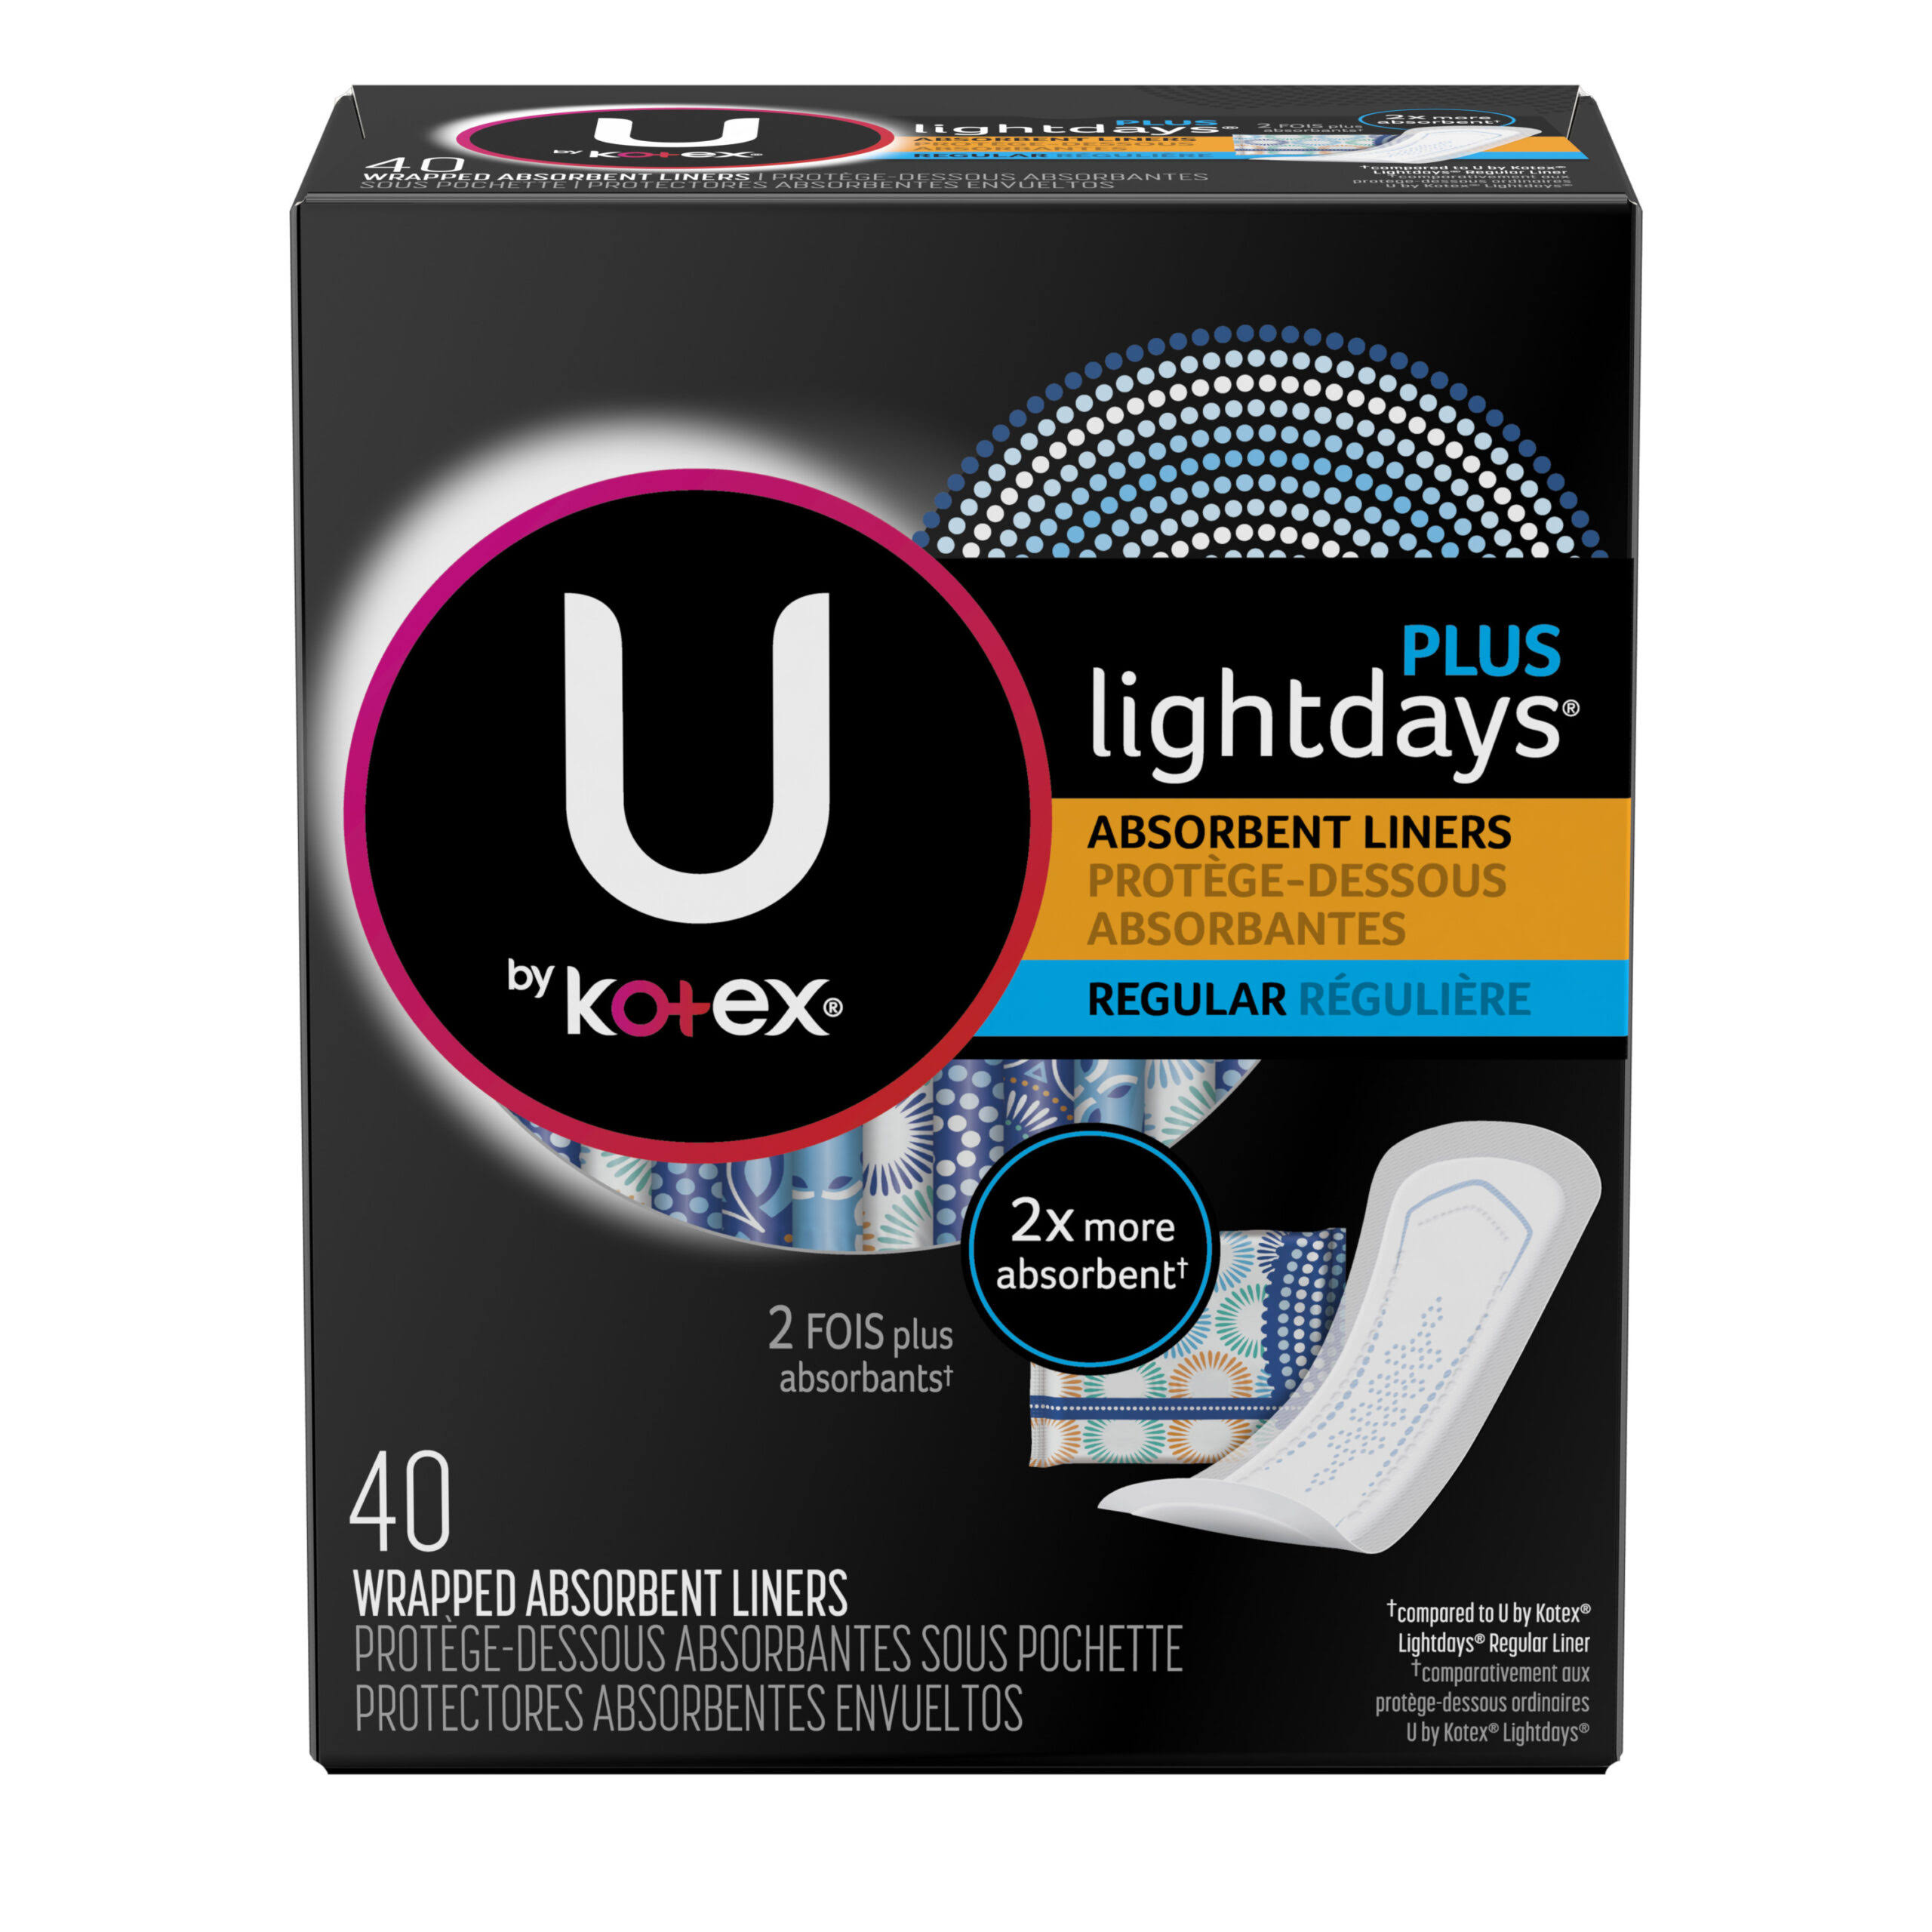 U By Kotex Curves Liners - 40 Wrapped Daily Liners, Regular